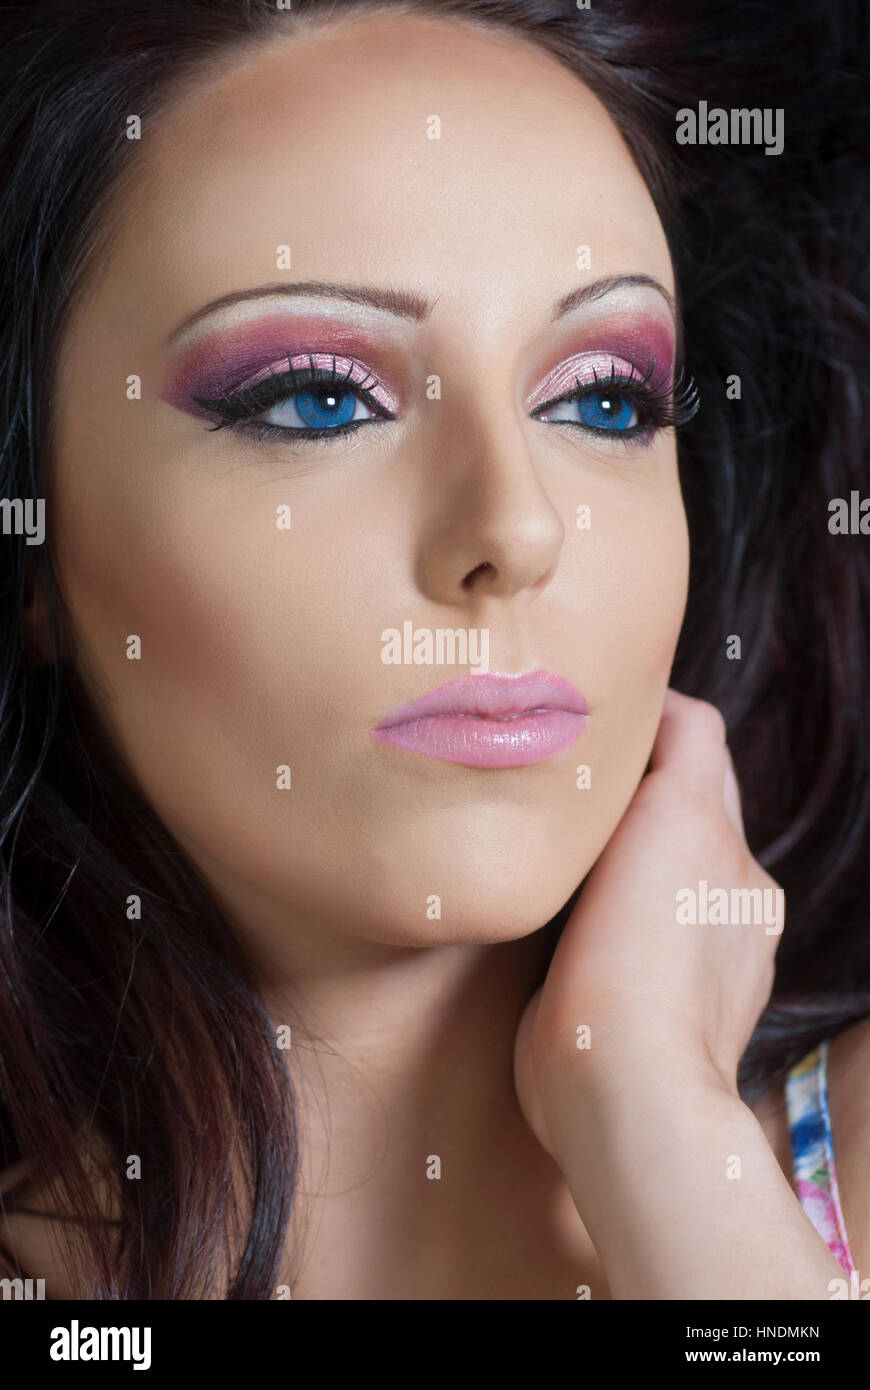 Beaitful woman with blue eyes wearing pink eyeshadow makeup hand touching  face looking away Stock Photo - Alamy